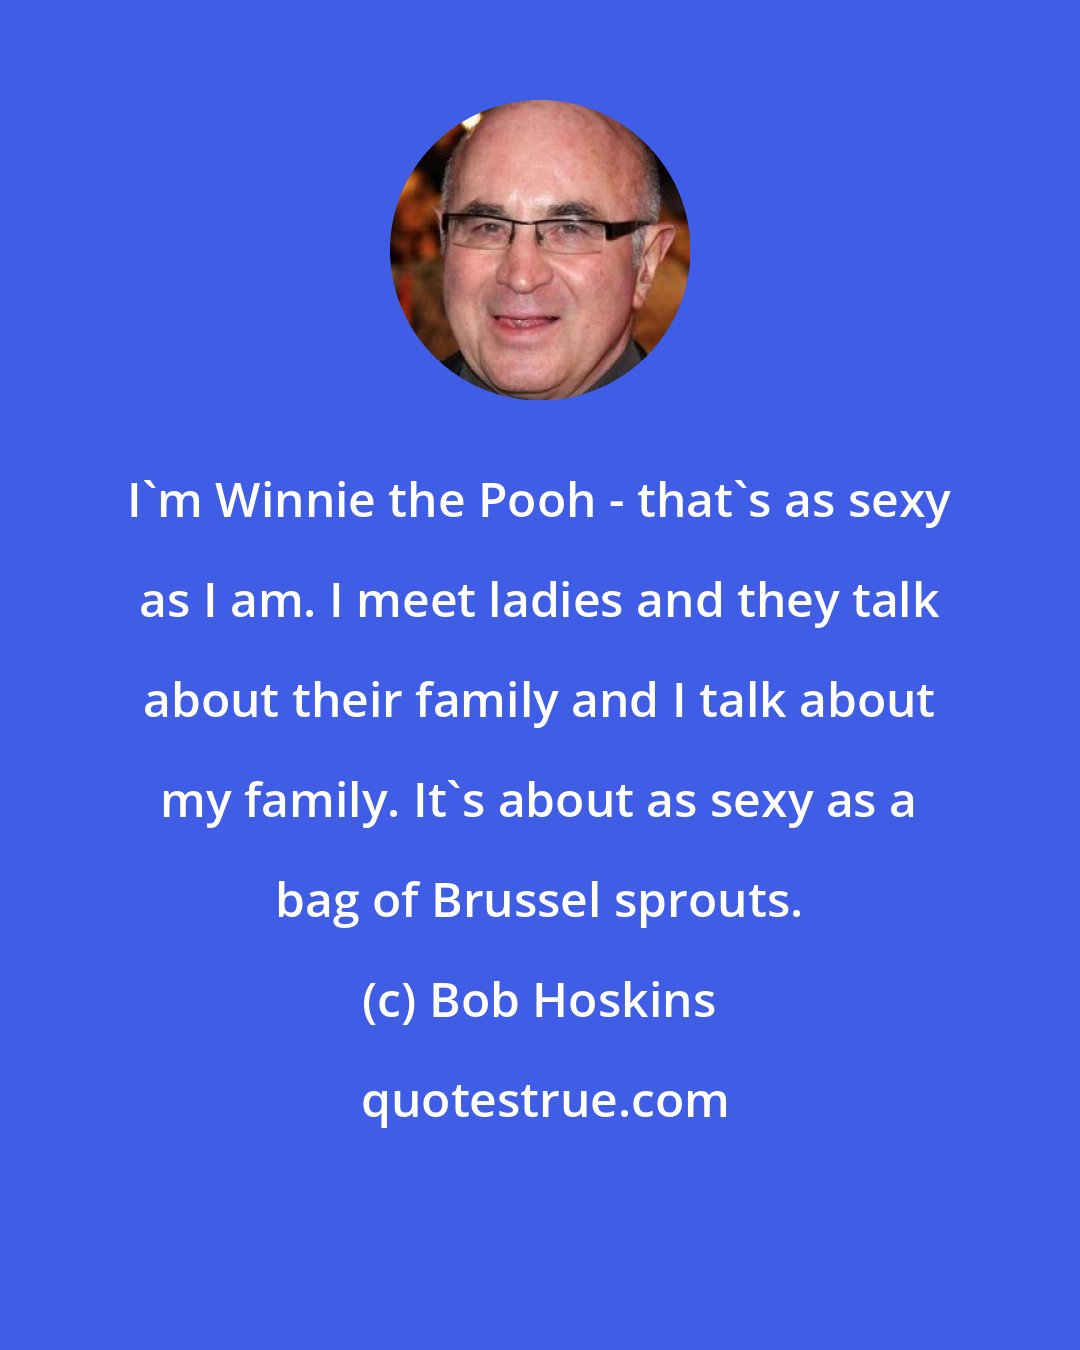 Bob Hoskins: I'm Winnie the Pooh - that's as sexy as I am. I meet ladies and they talk about their family and I talk about my family. It's about as sexy as a bag of Brussel sprouts.